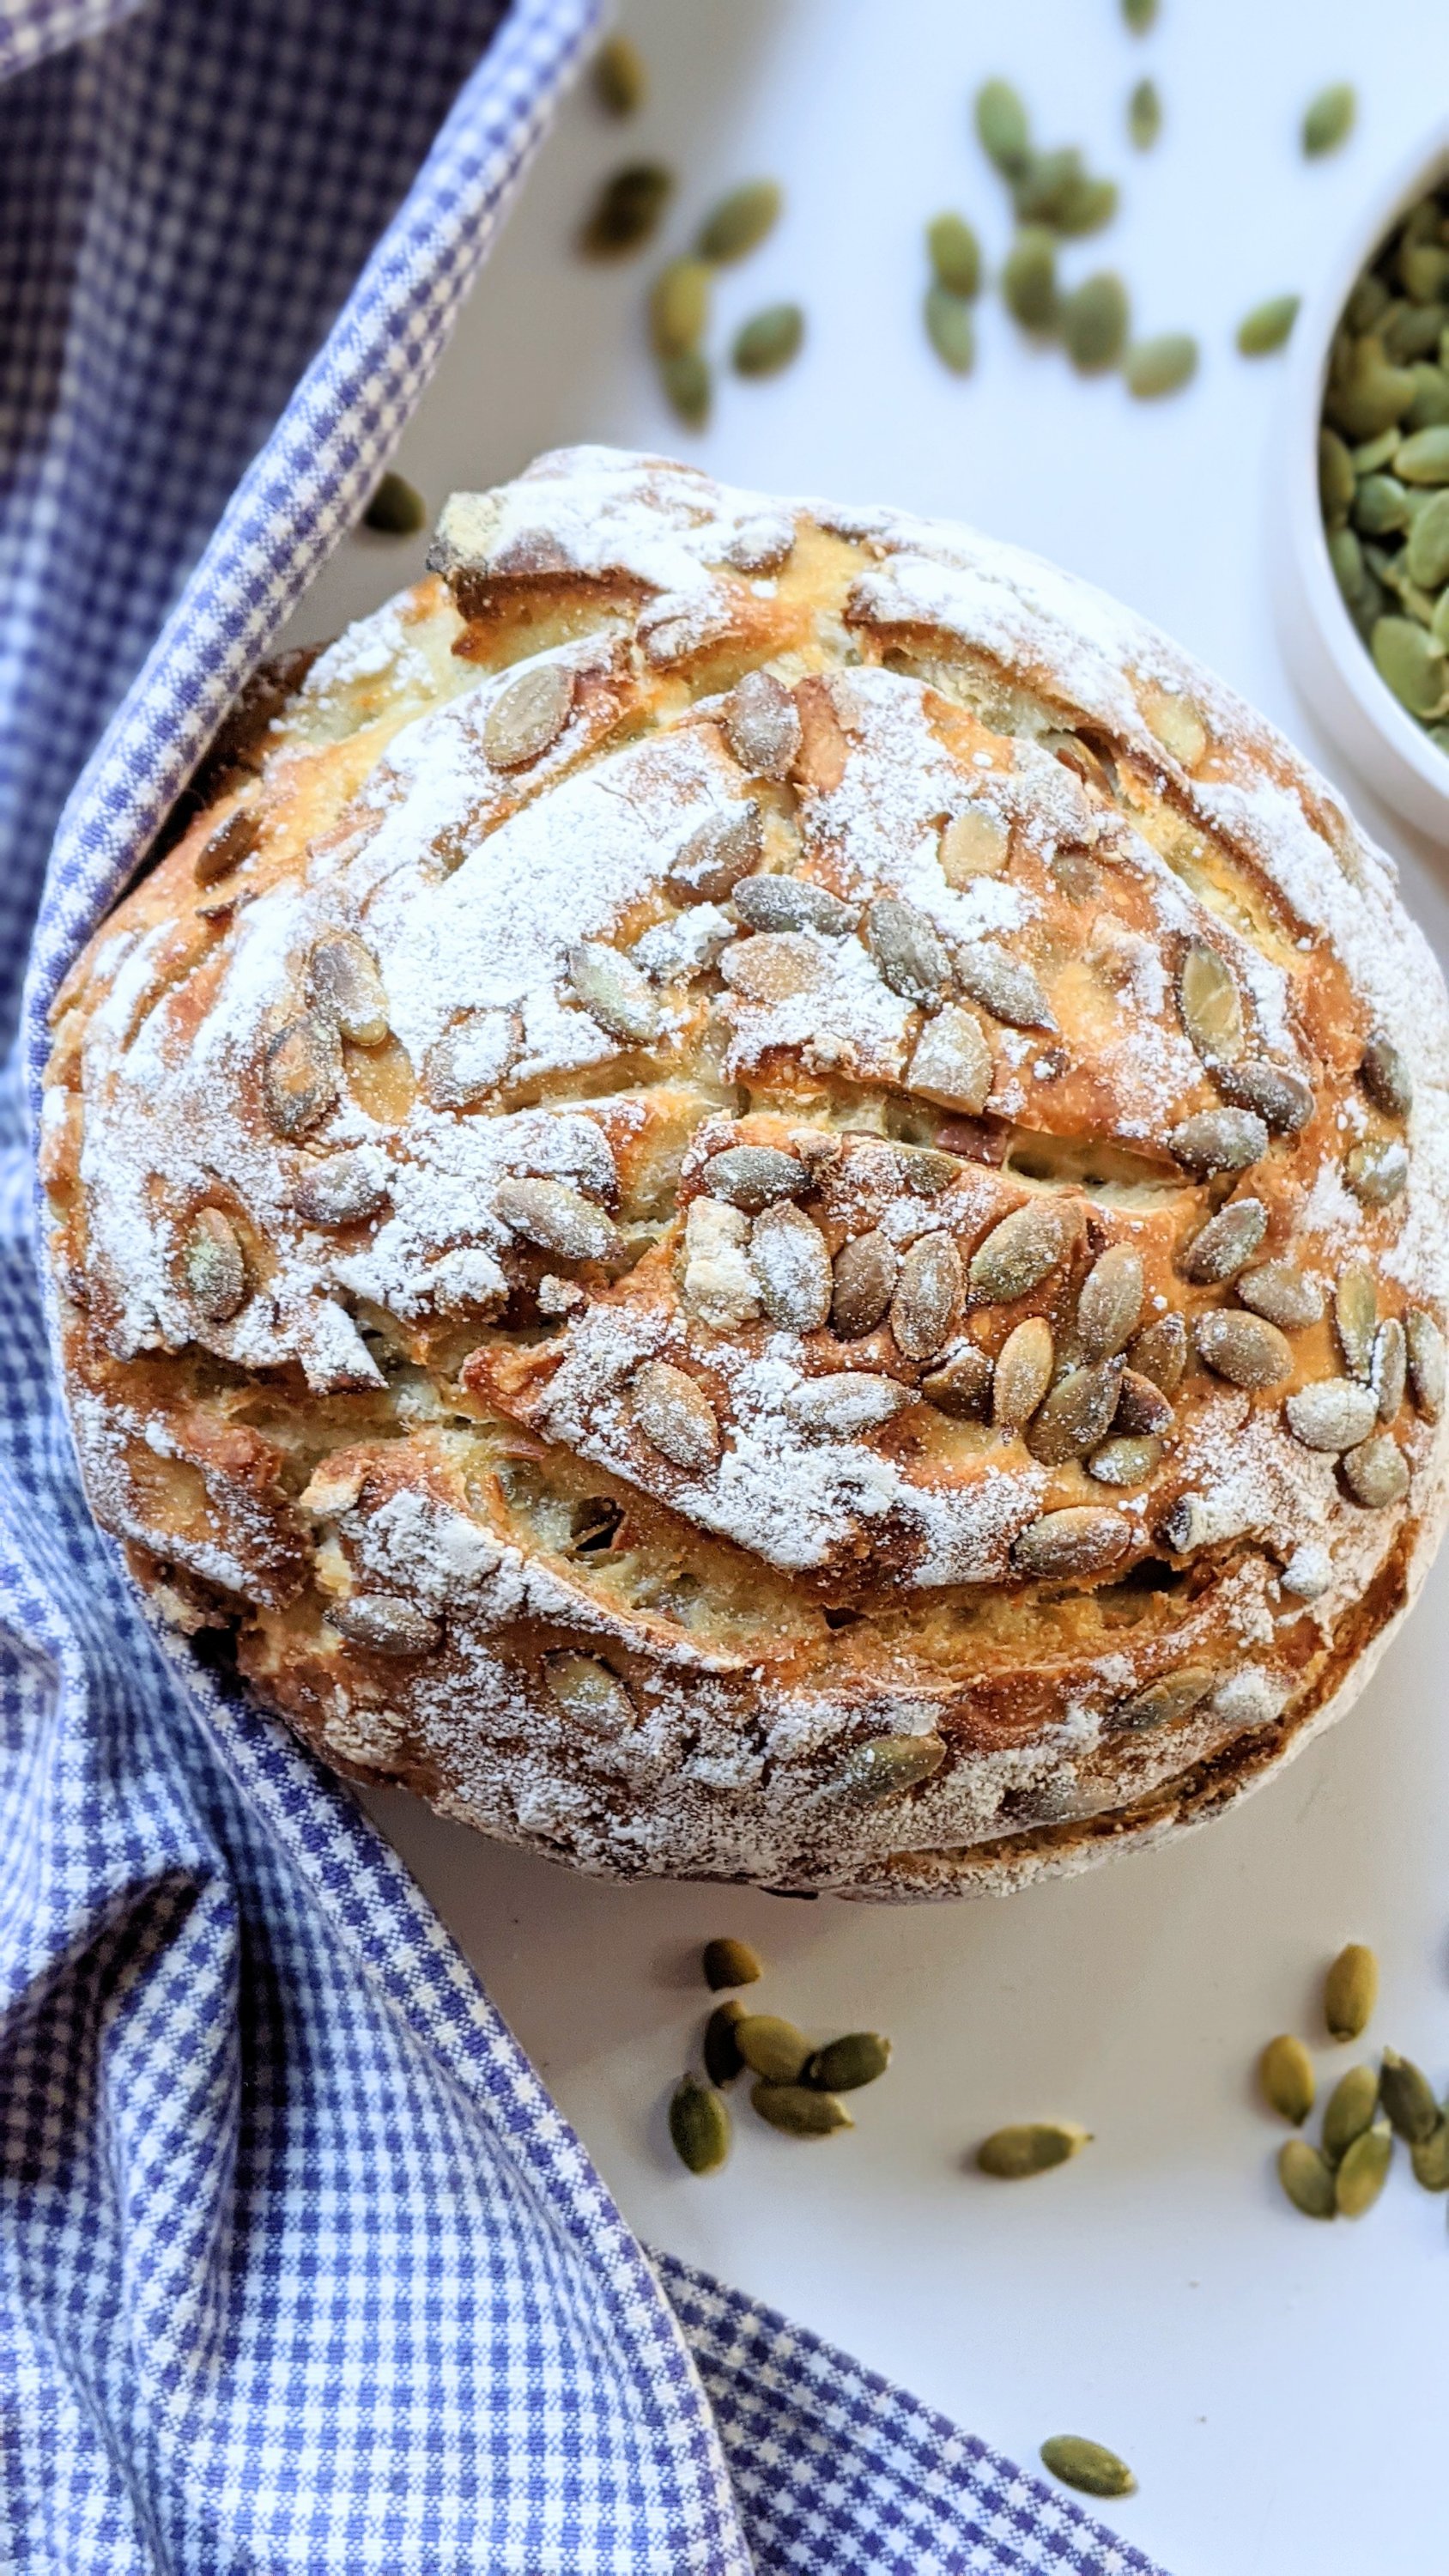 sourdough with pumkin seeds pepitas bread recipe healthy sourdough discard loaf recipe durtch oven no knead bread with seeds baked in